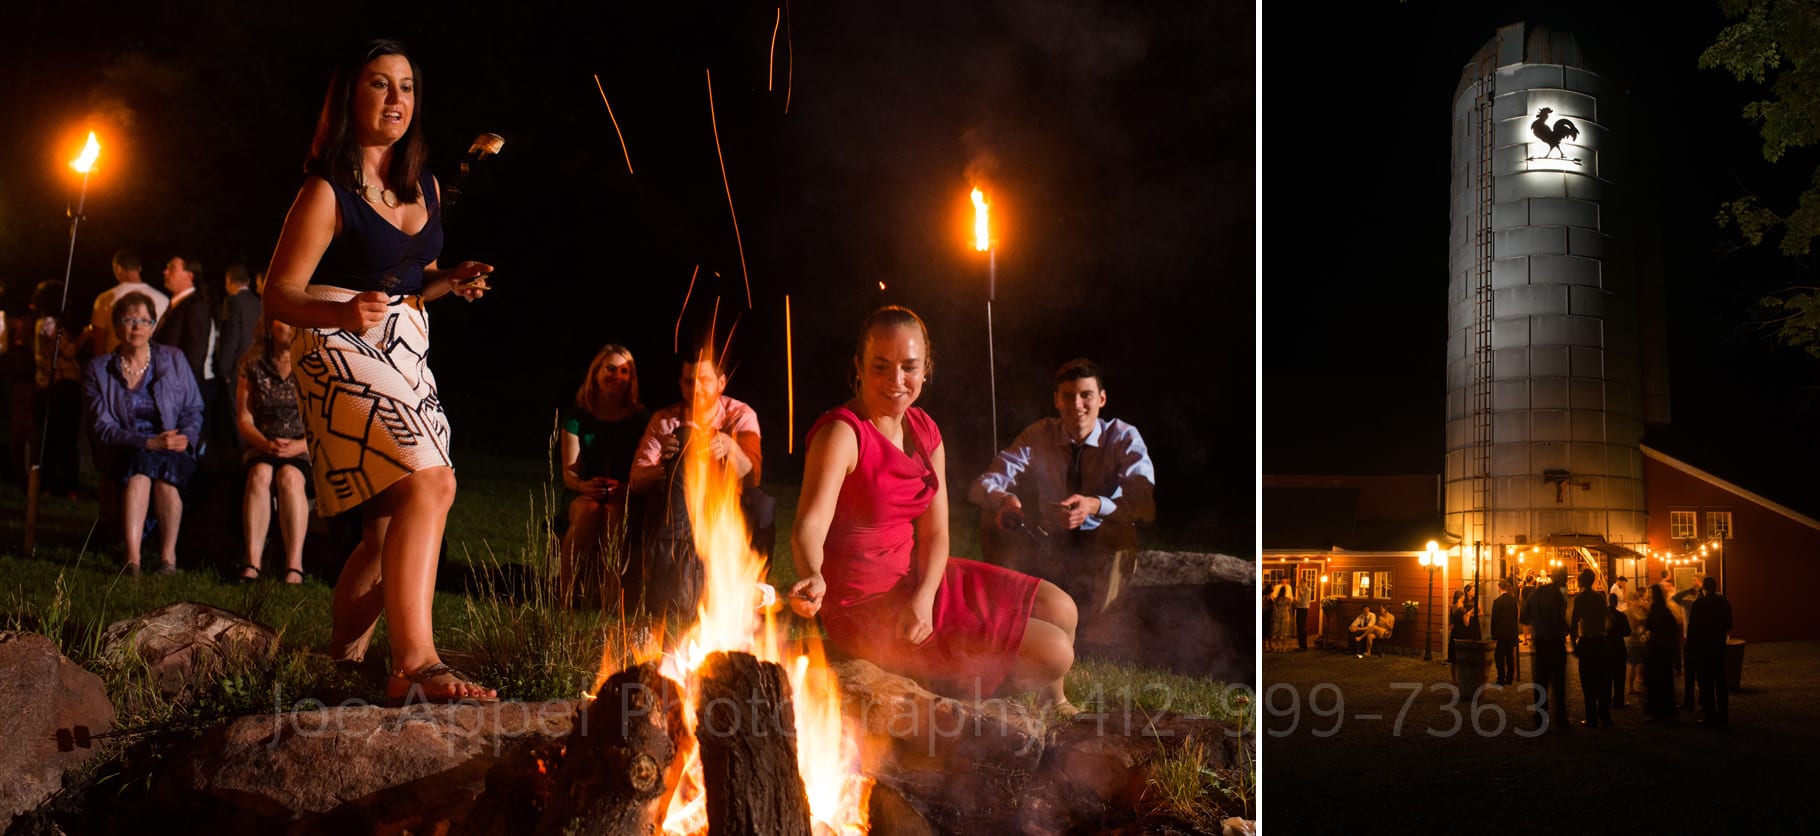 a woman steps up to a campfire while toasting a marshmallow. Another woman in a red dress sits while toasting her own marshmallow. A night time view of guests gathered around the base of the silo at Chanteclaire Farm. The rooster logo is backlit at the top of the silo during their Chanteclaire Farm Wedding.